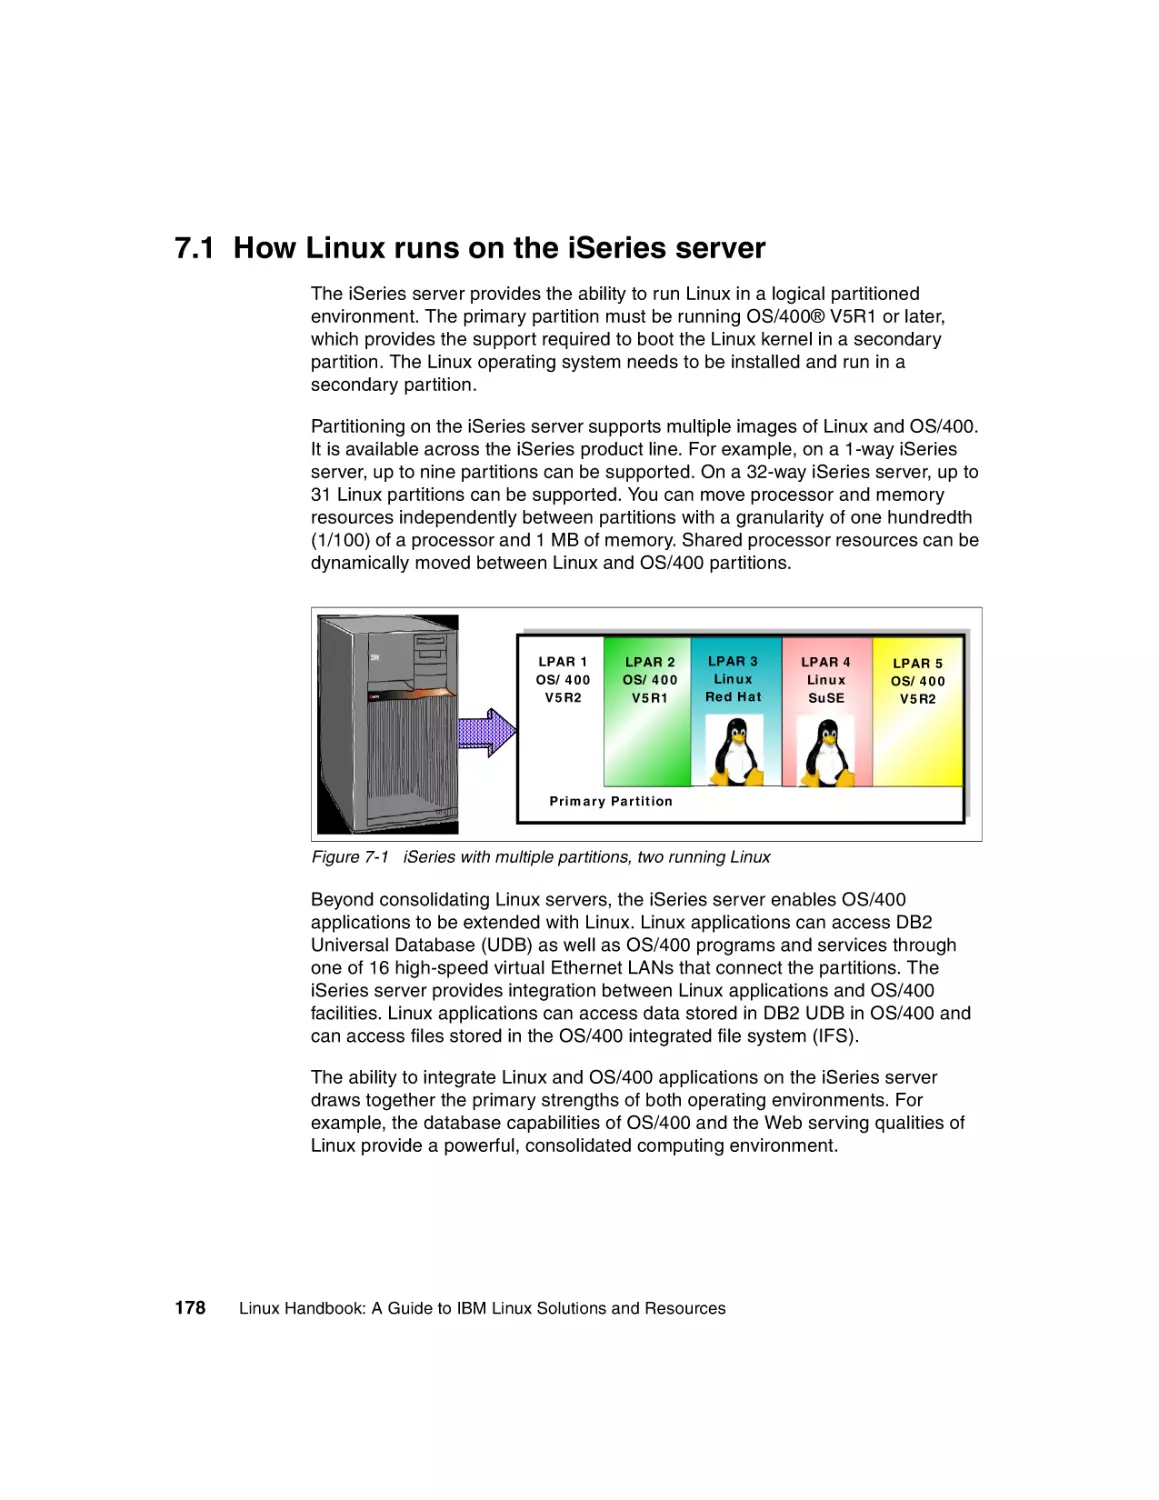 7.1 How Linux runs on the iSeries server